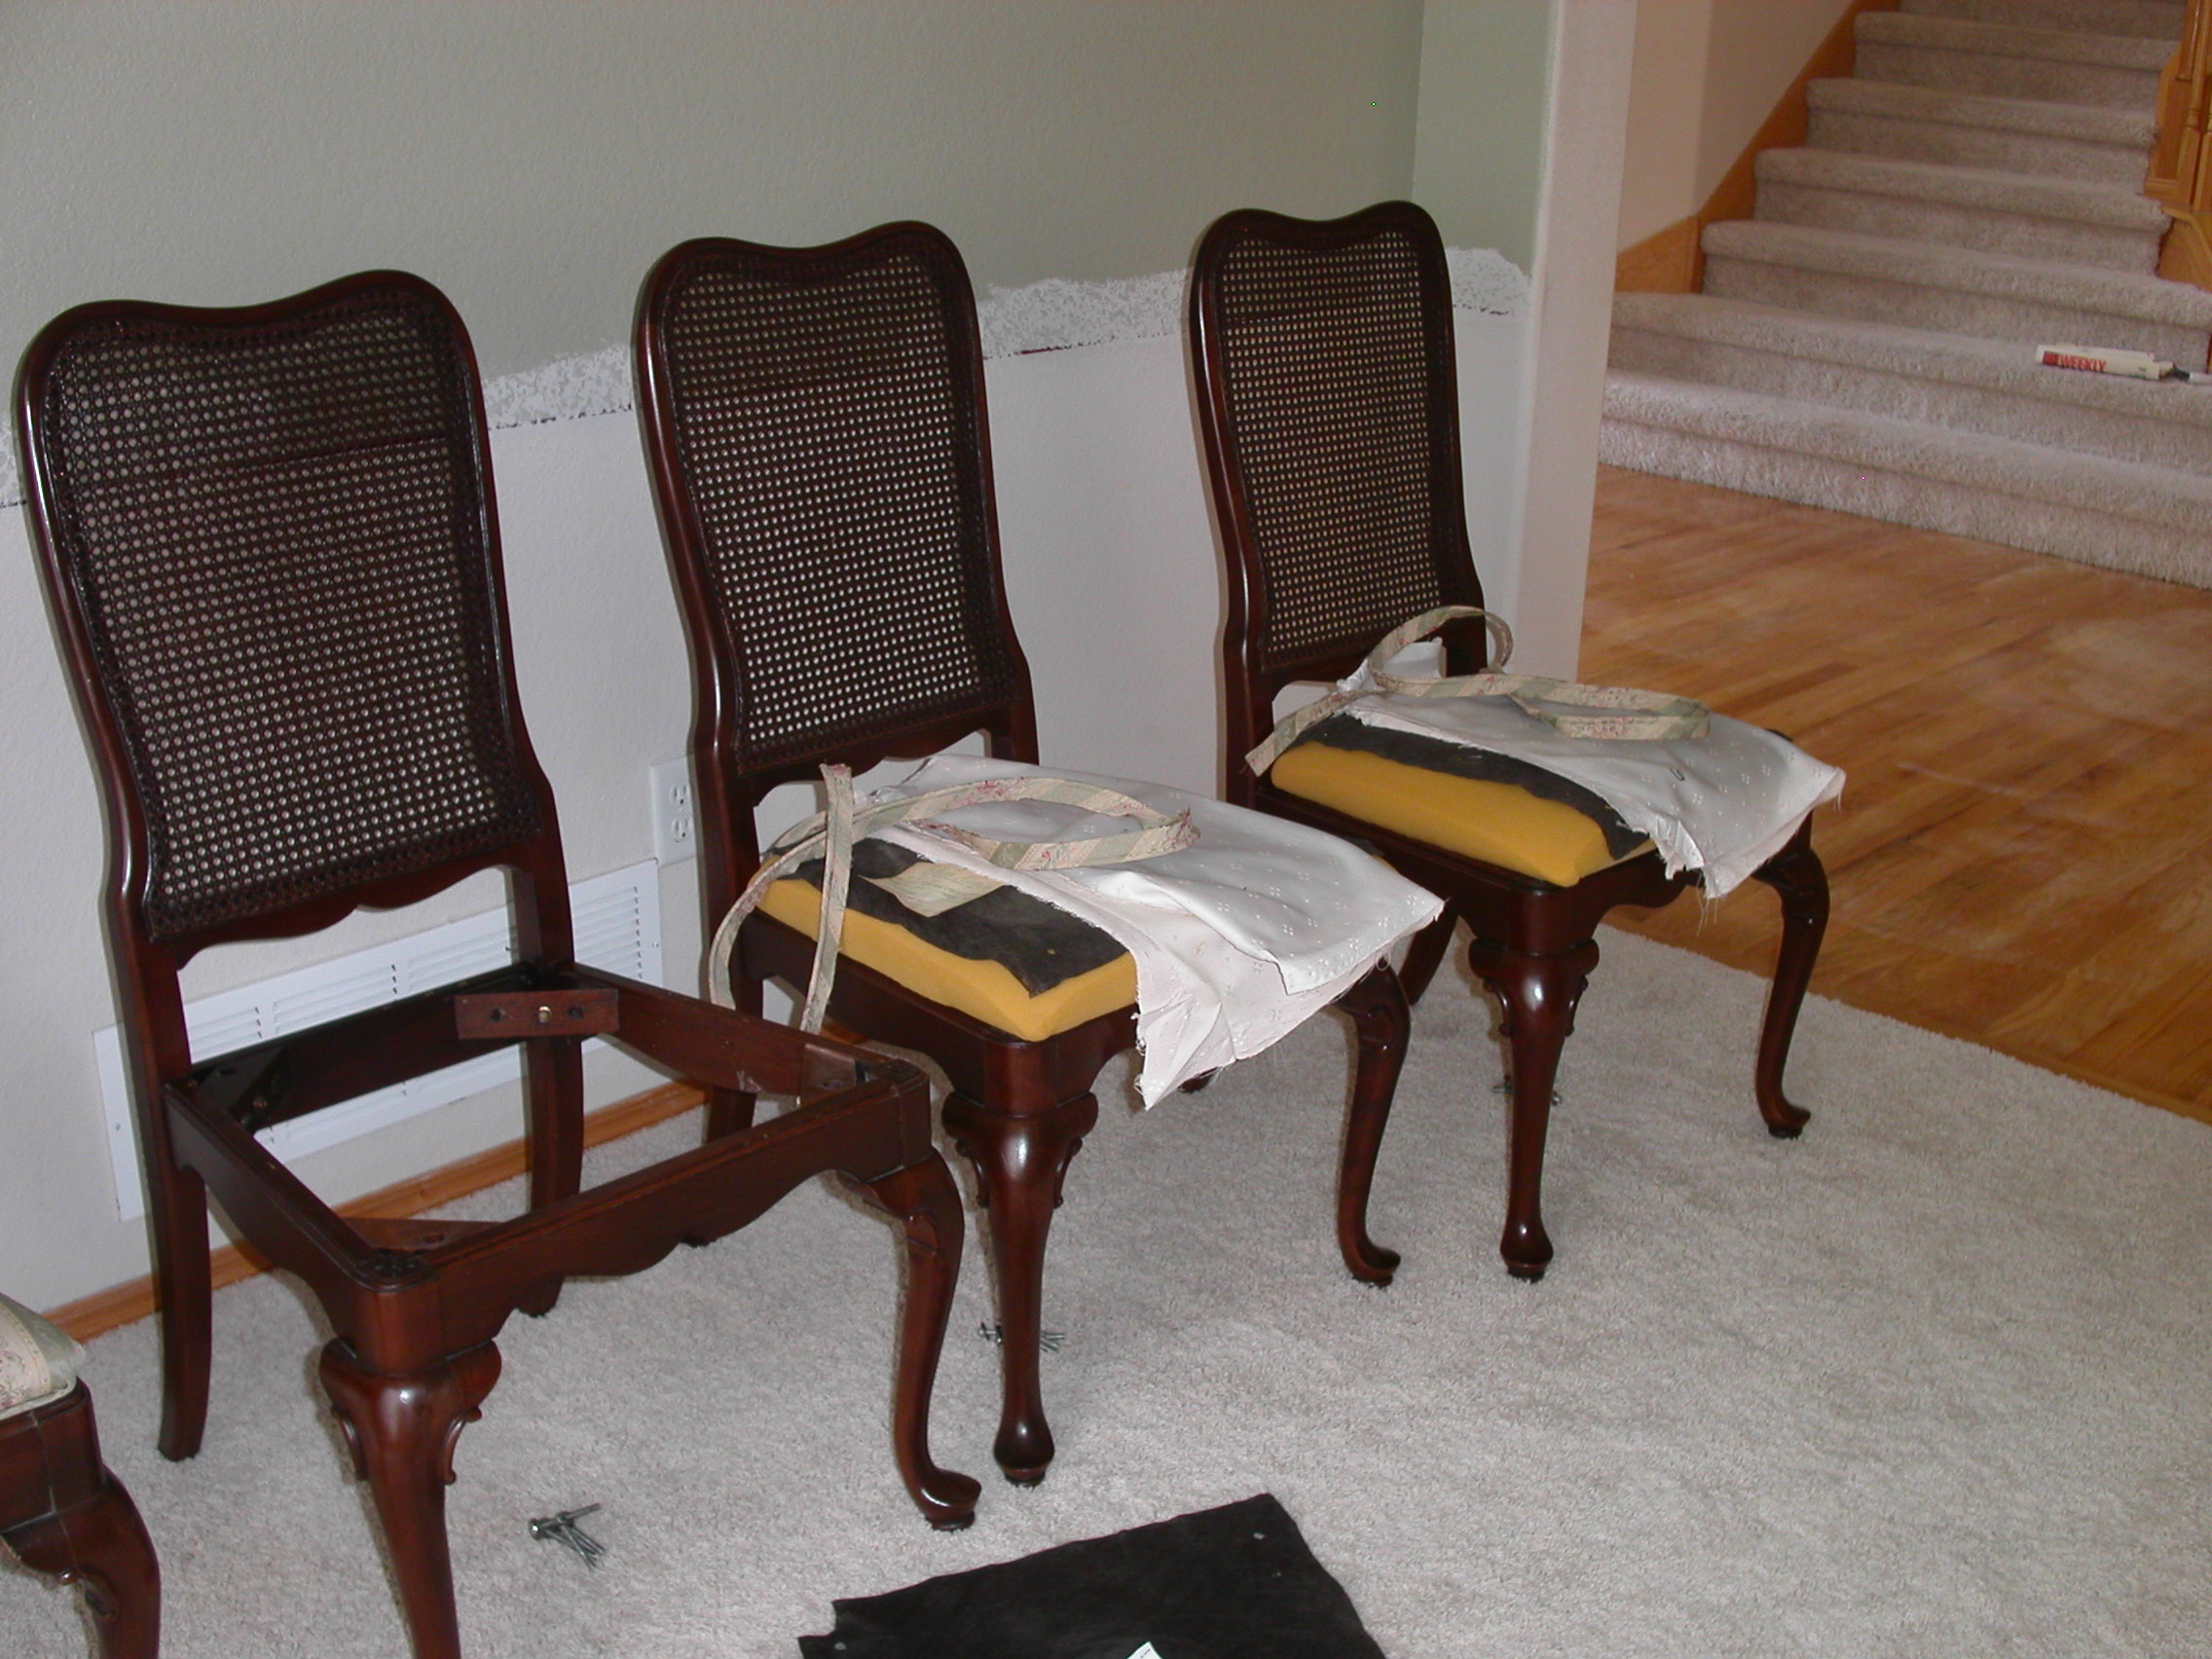 Awesome Reupholster Dining Chairs Yourself That Will Get You intended for measurements 2272 X 1704